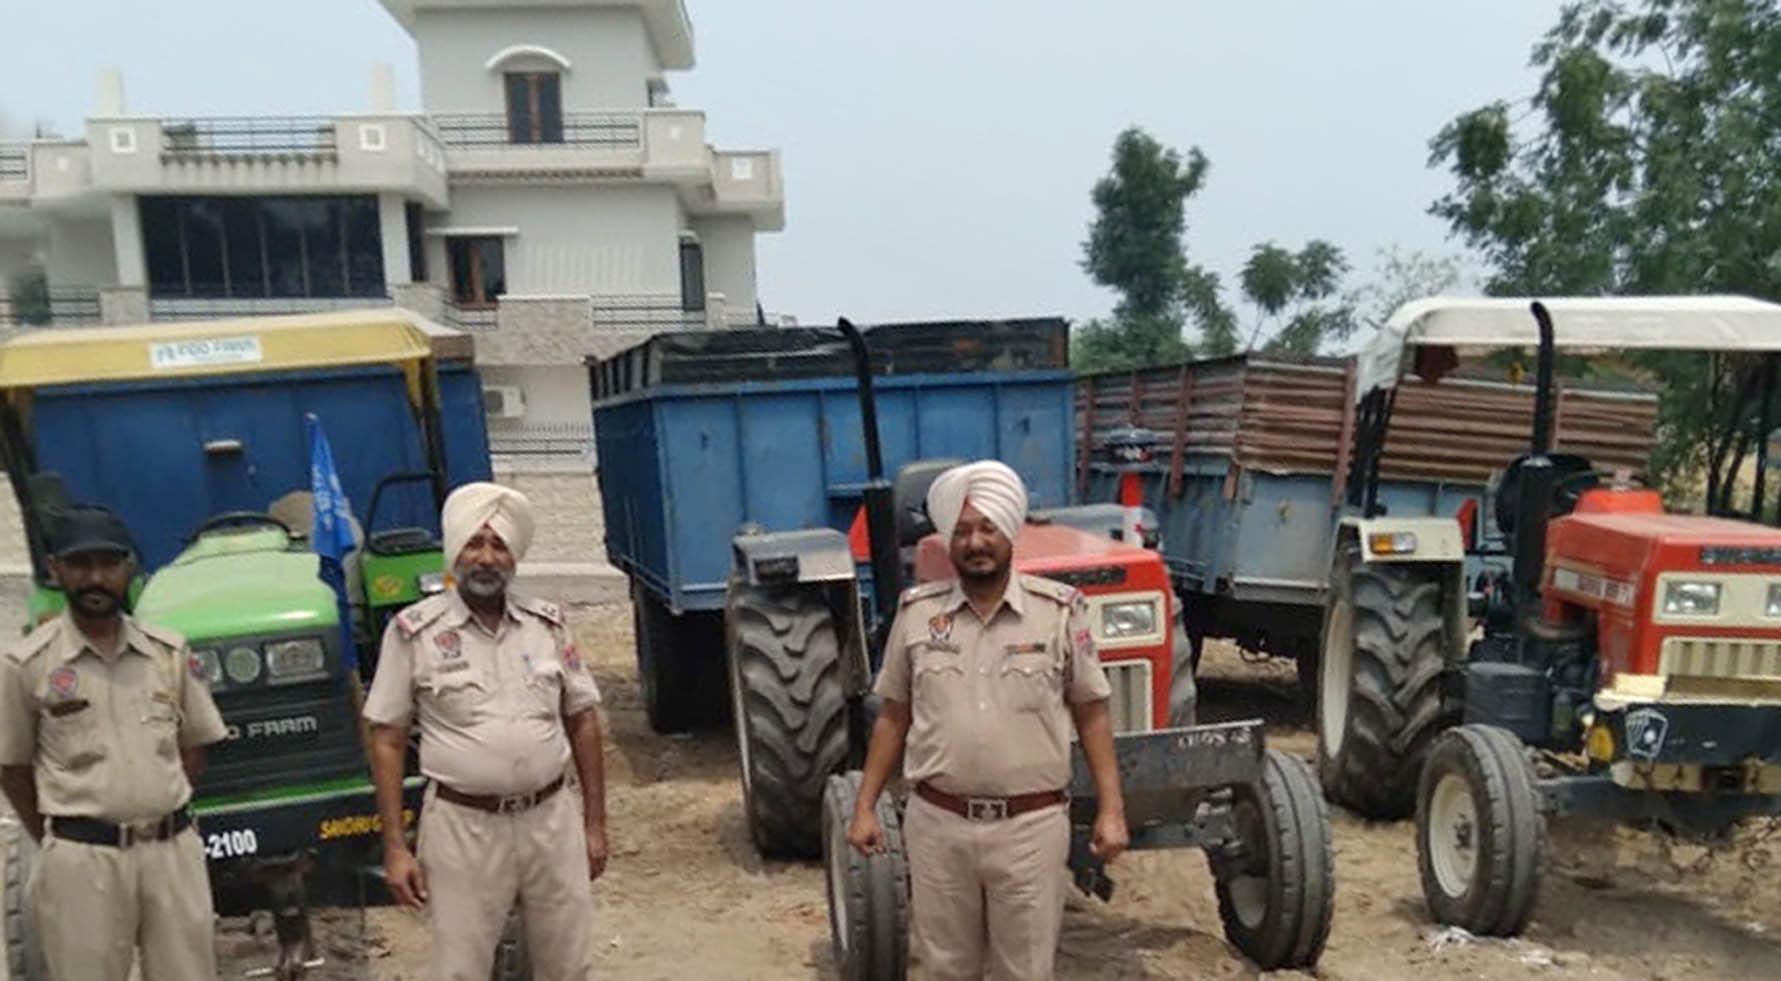 Illegal mining: One held in Jalandhar; JCB machine, 3 tractor-trailers seized